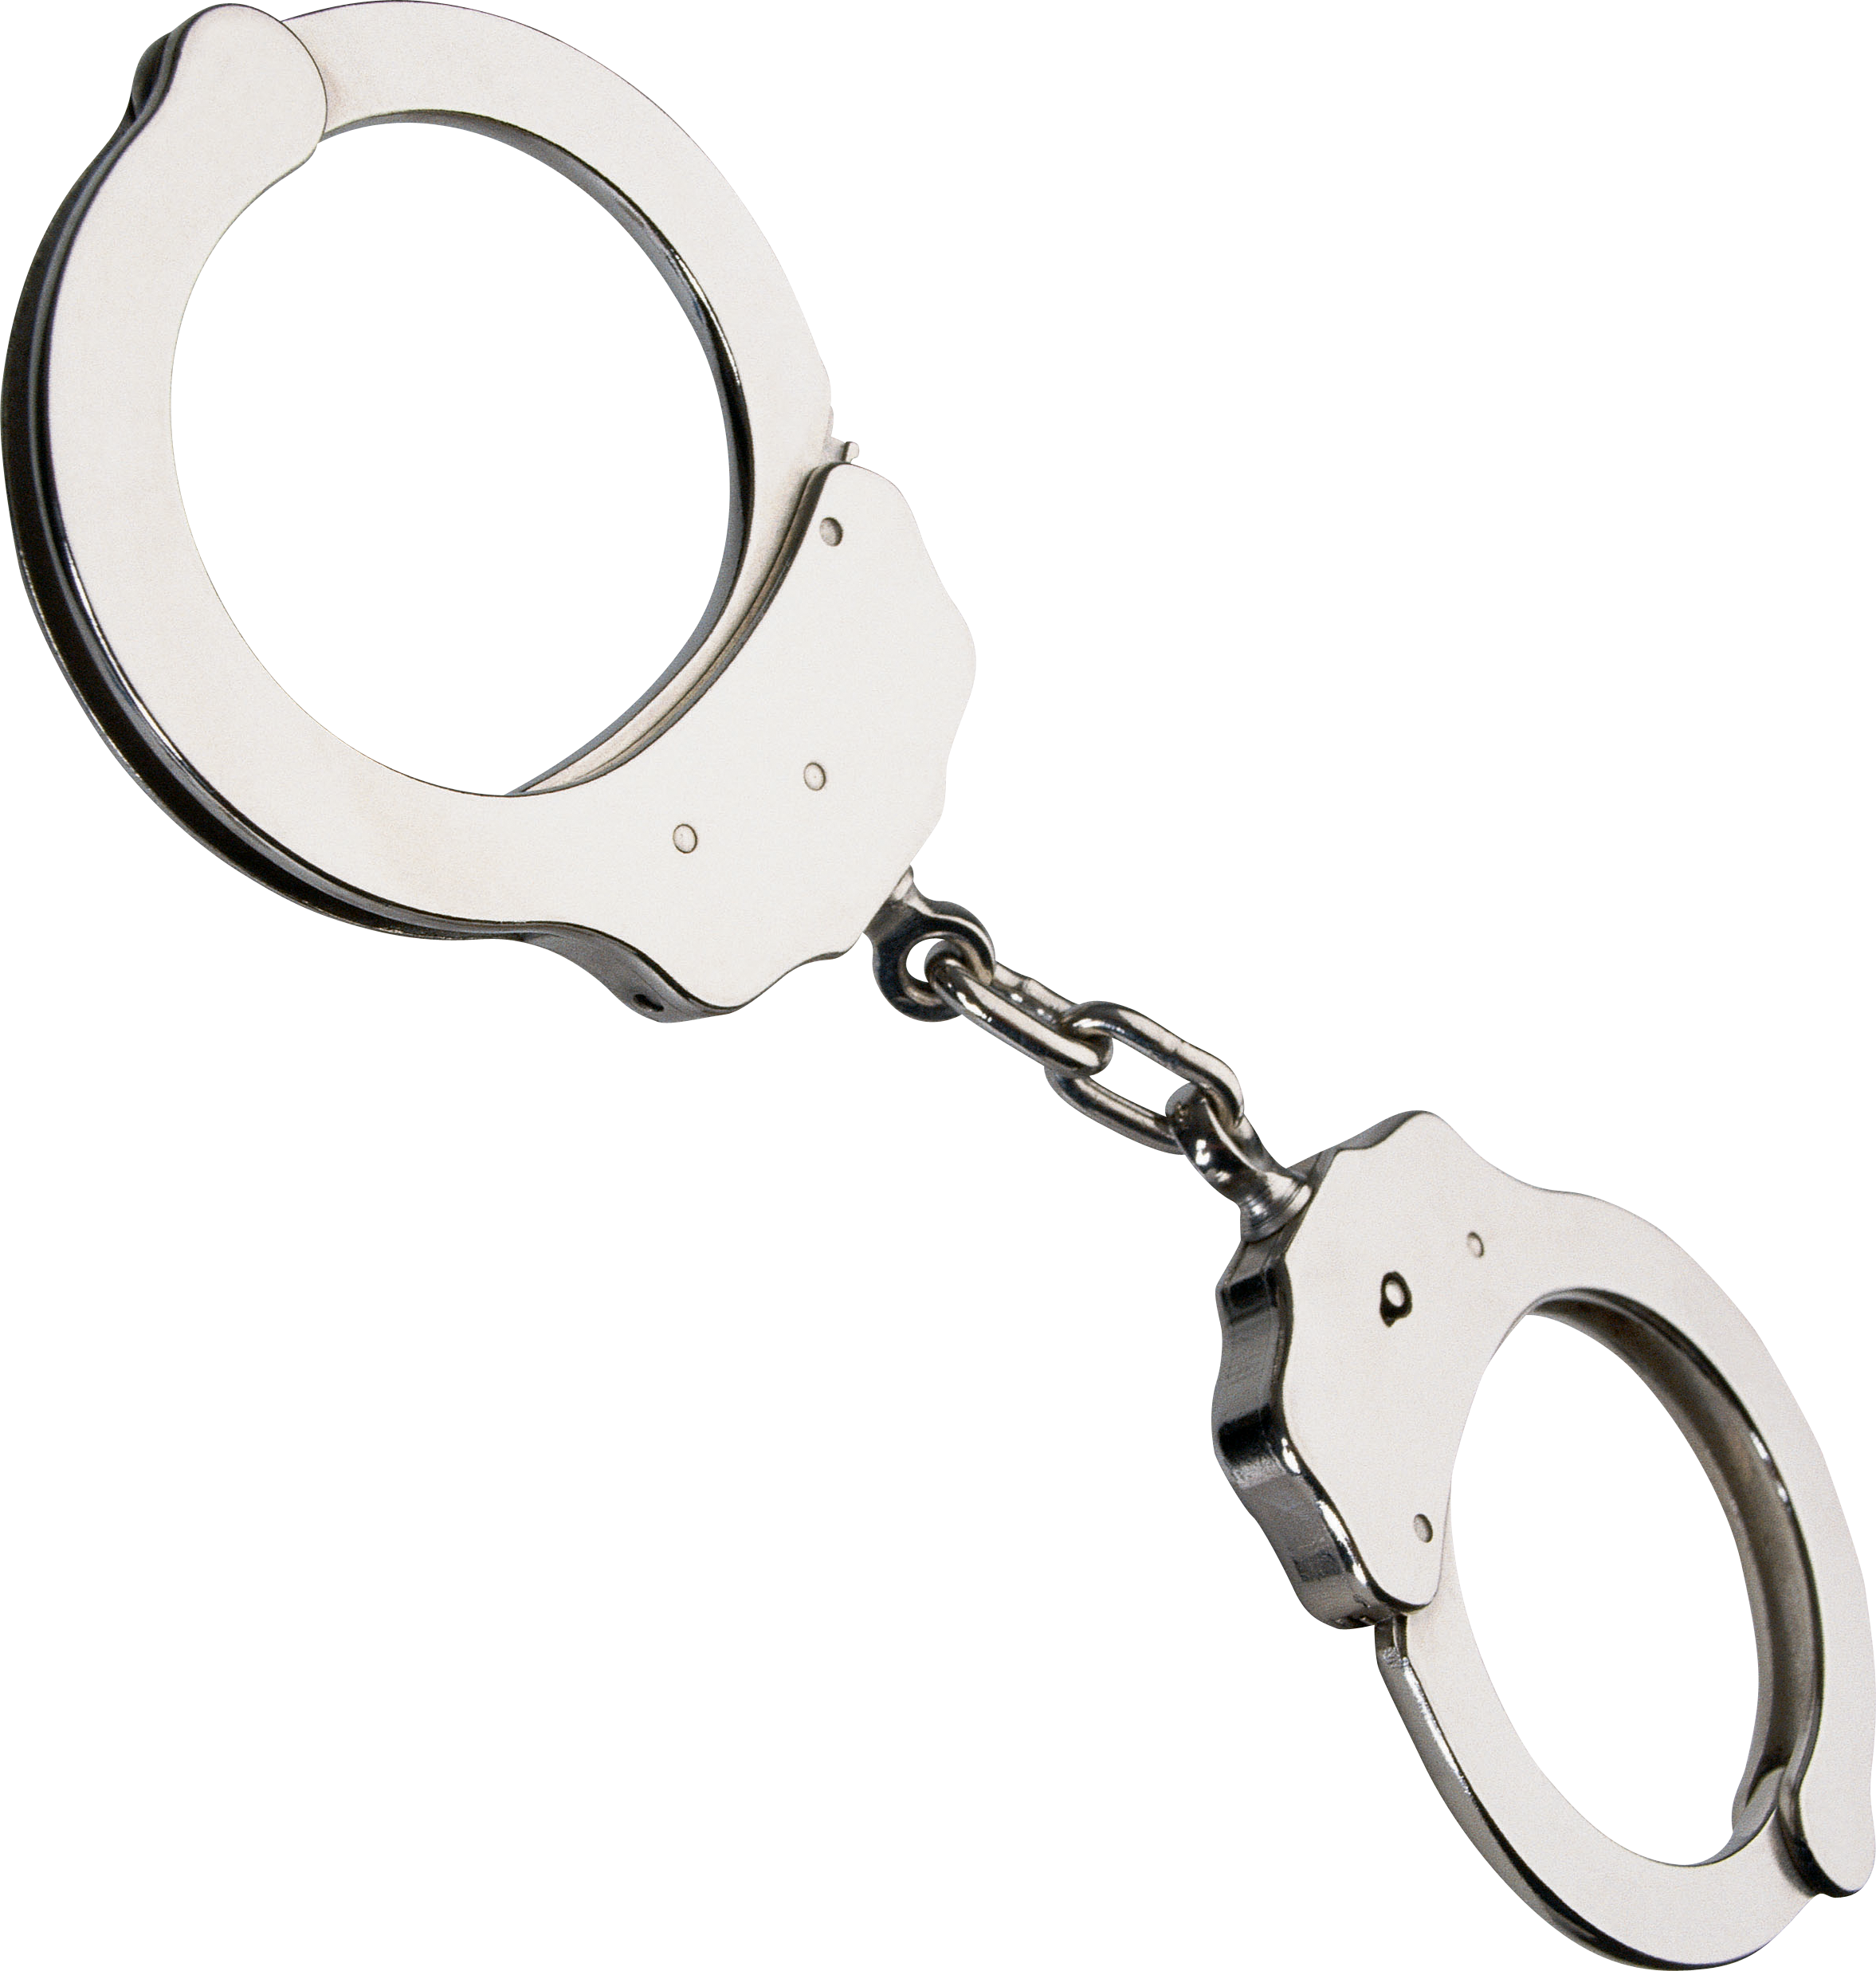 handcuffs png images download crazypngm crazy png images download #29605